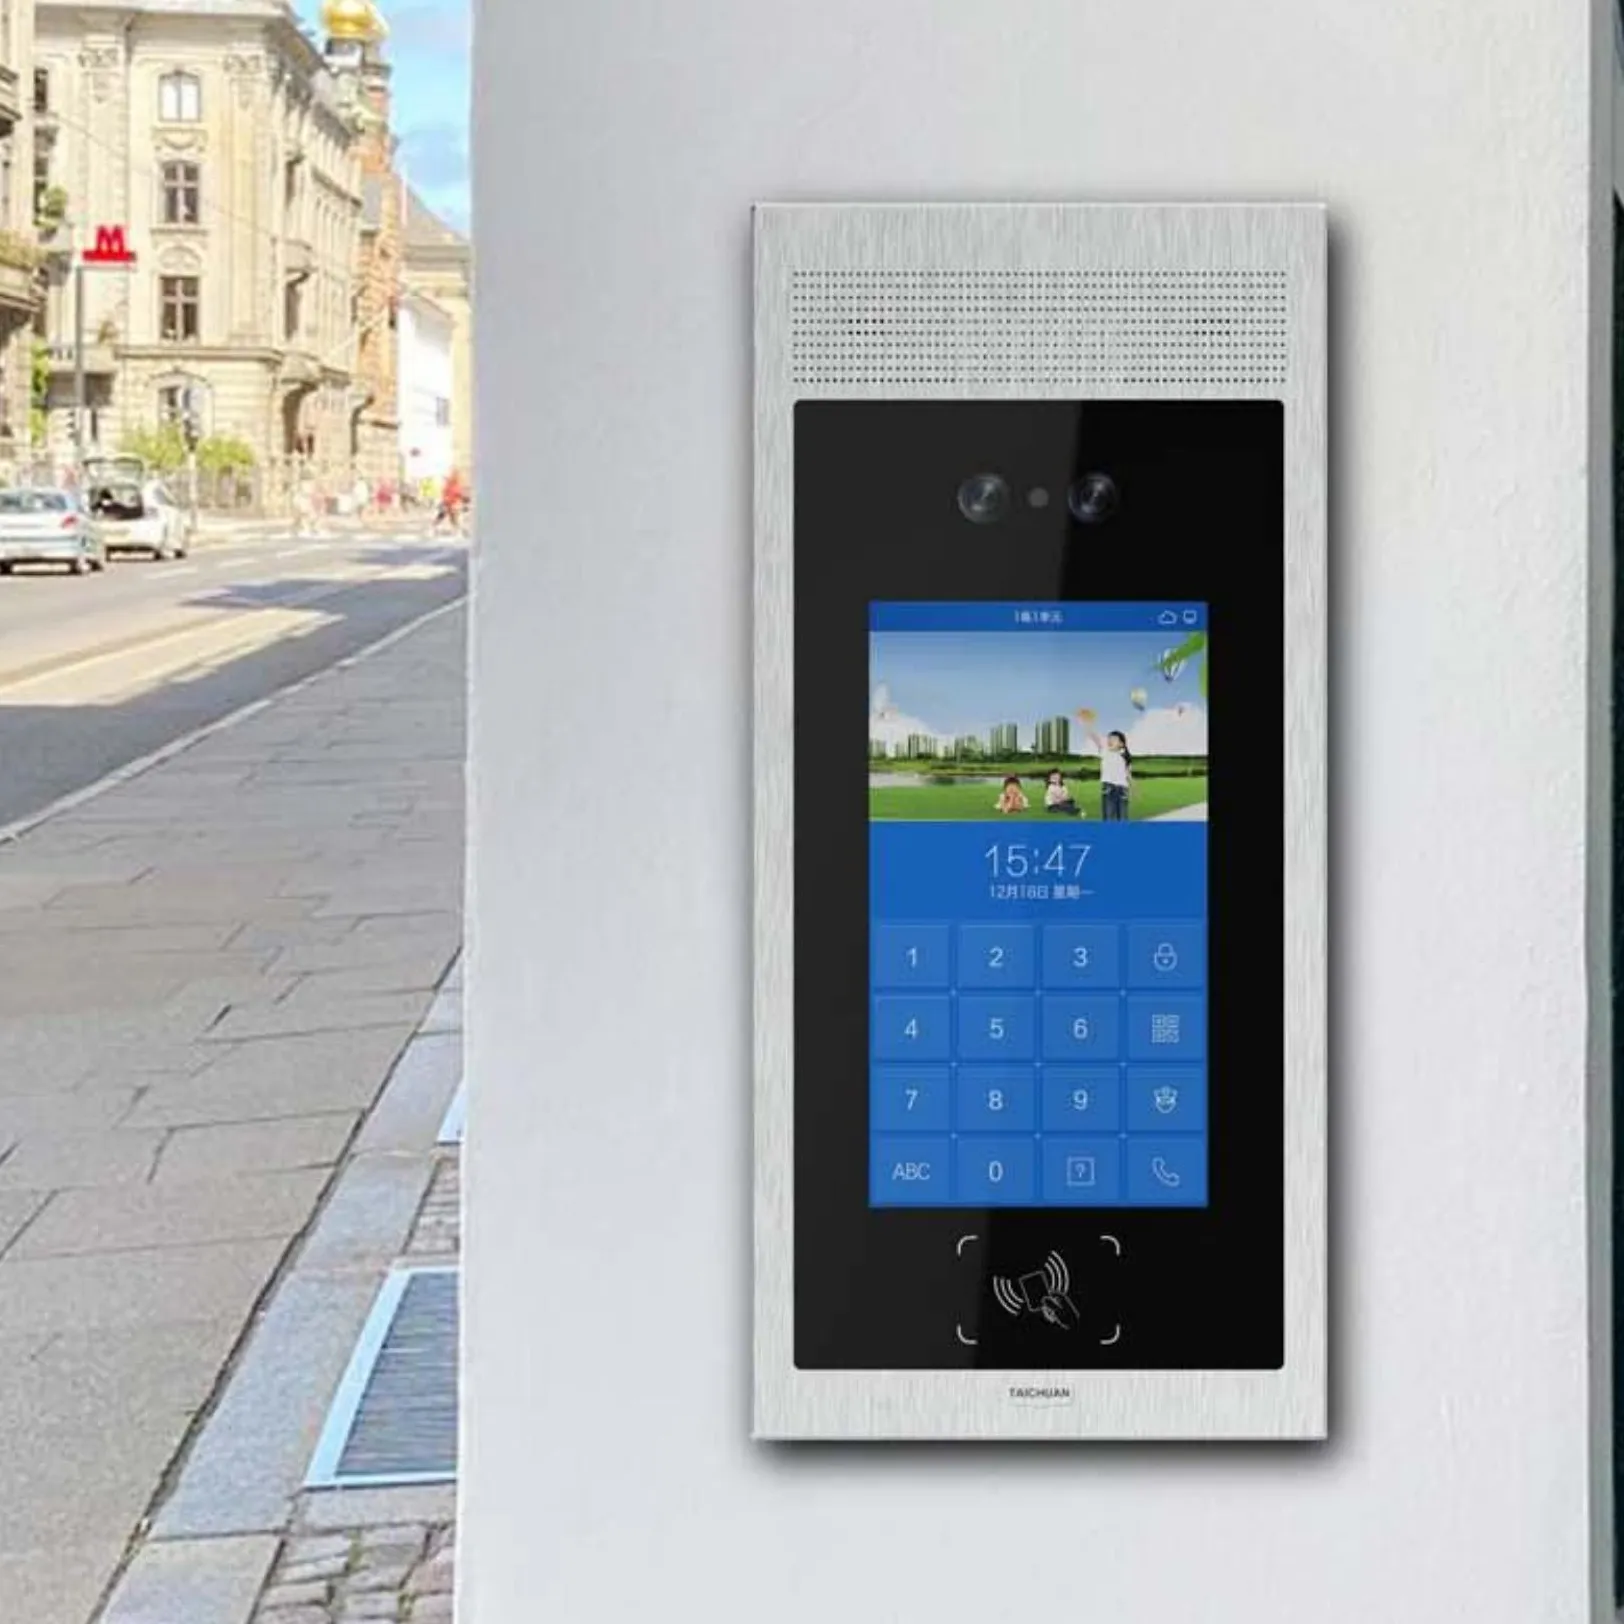 Apartment Tower Smart ring doorbell With Face Recognition Video Intercom System